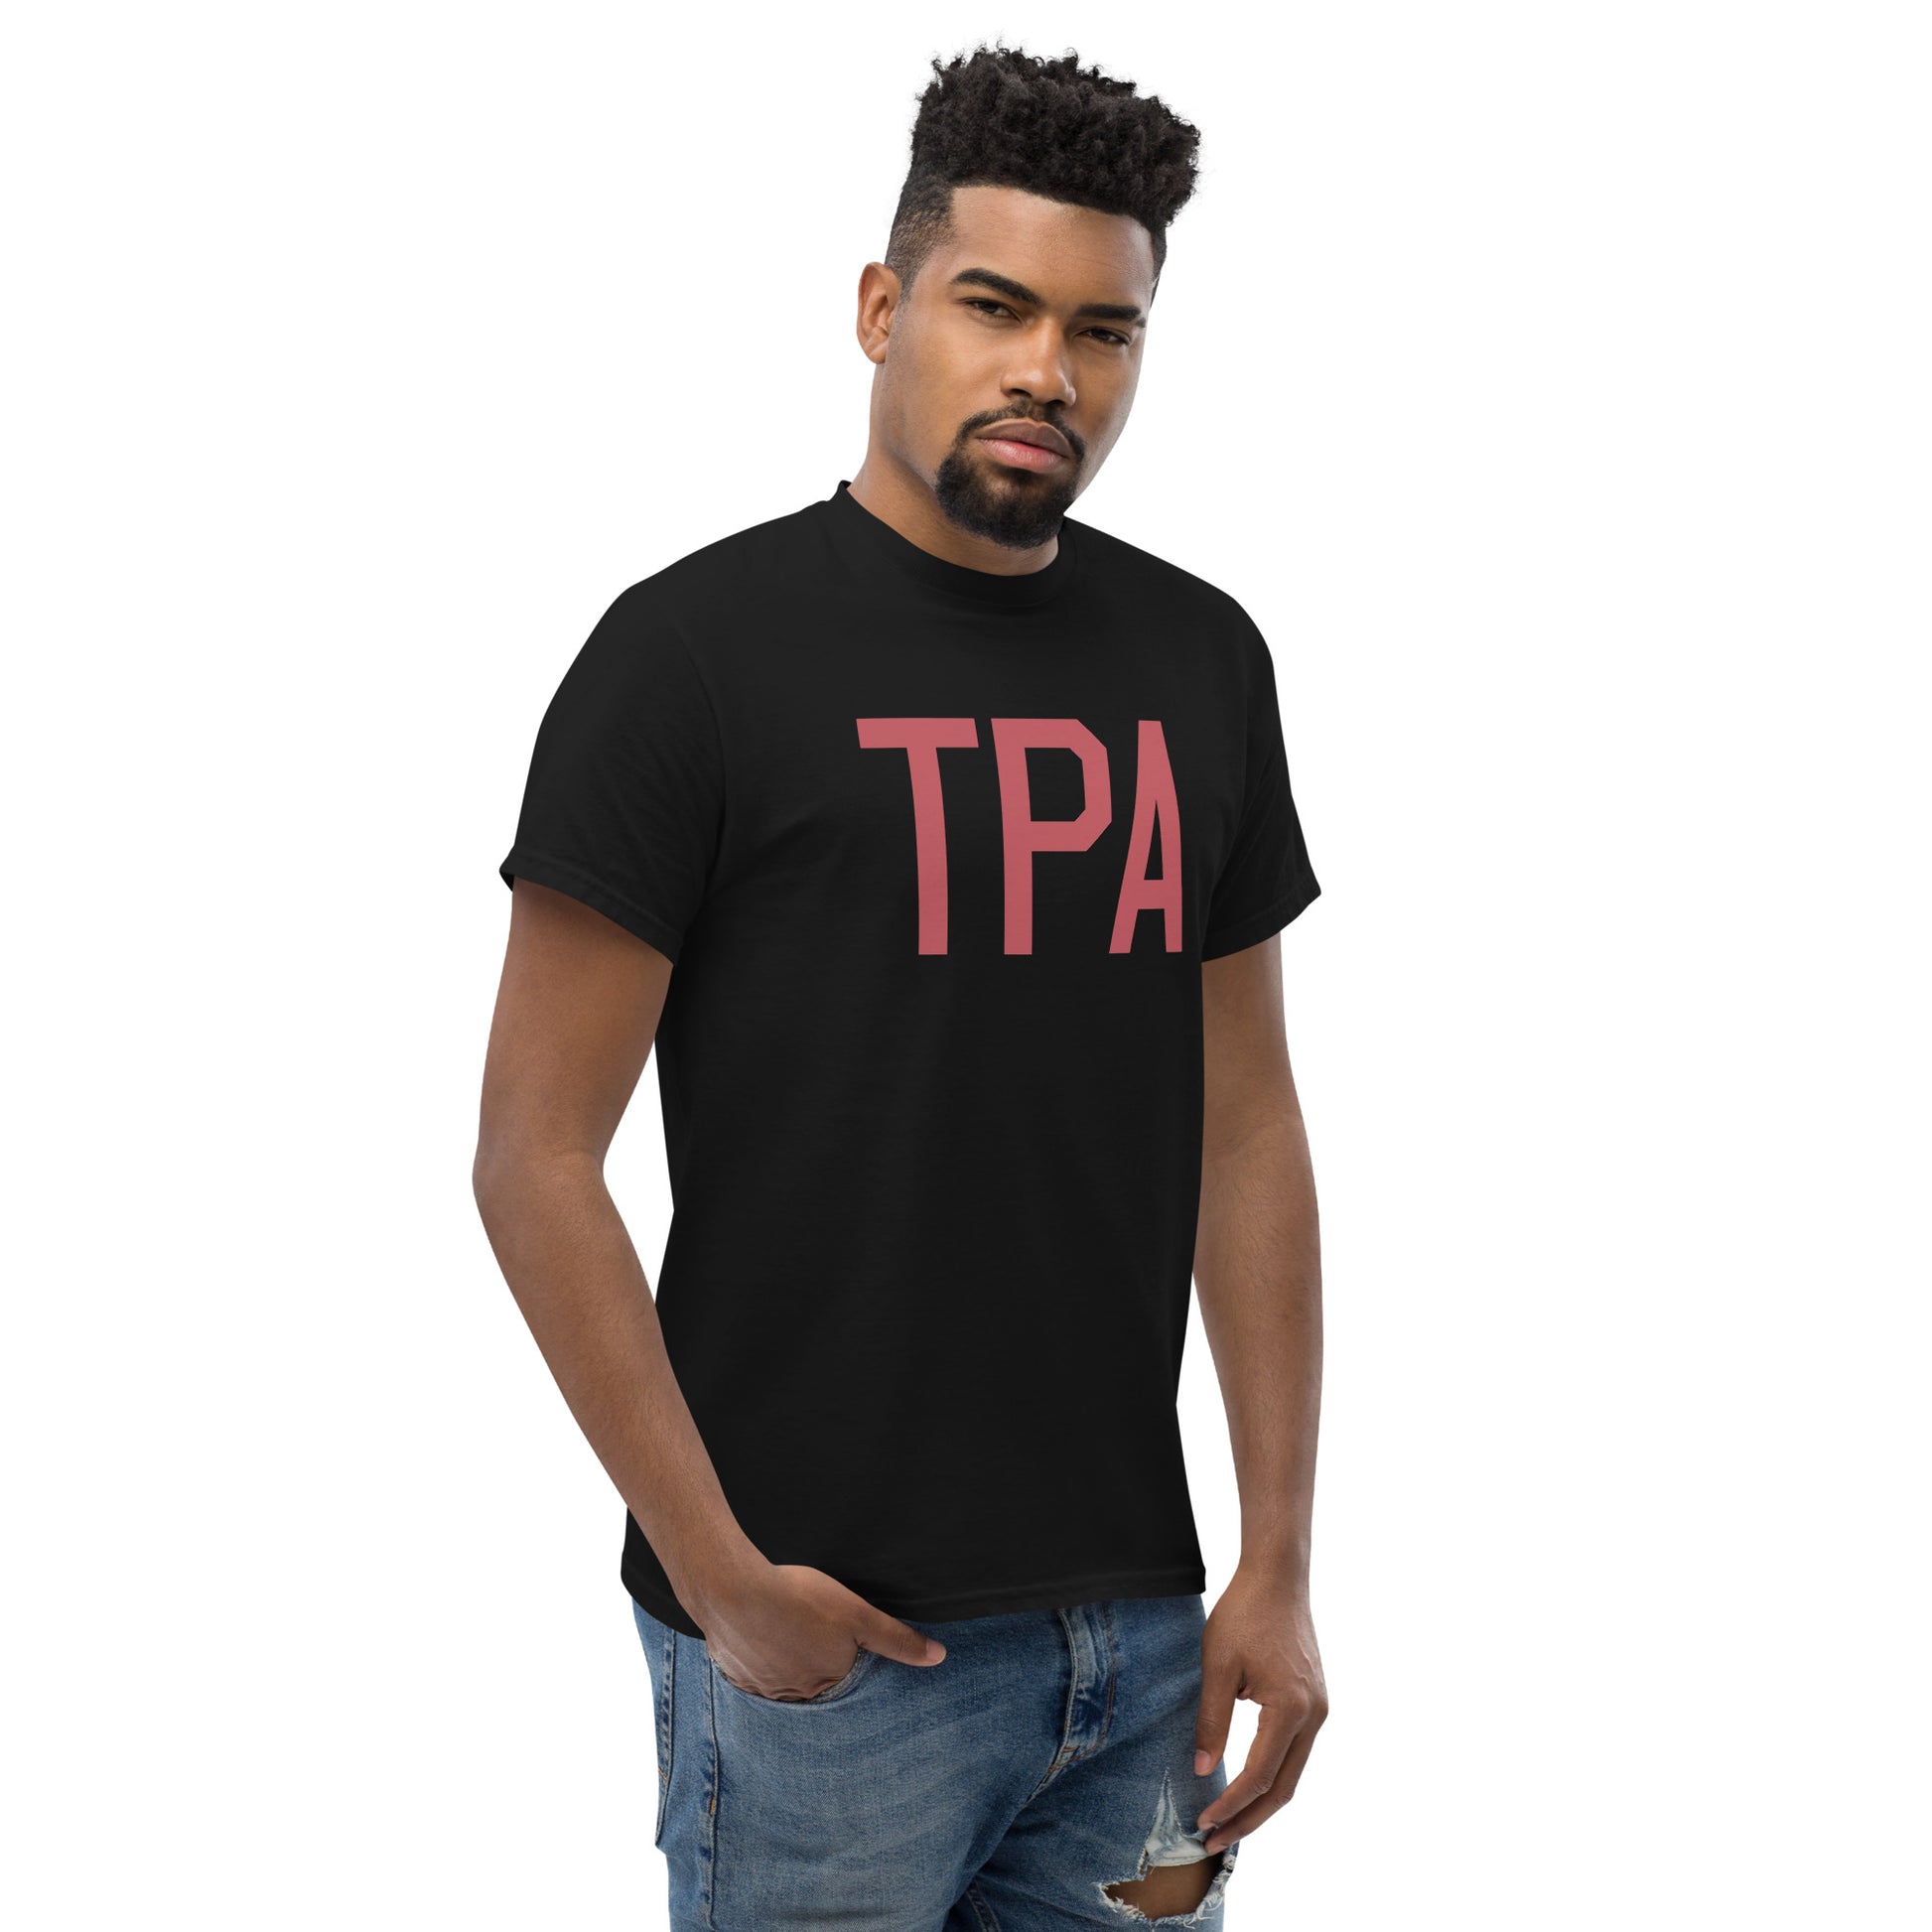 Aviation Enthusiast Men's Tee - Deep Pink Graphic • TPA Tampa • YHM Designs - Image 08